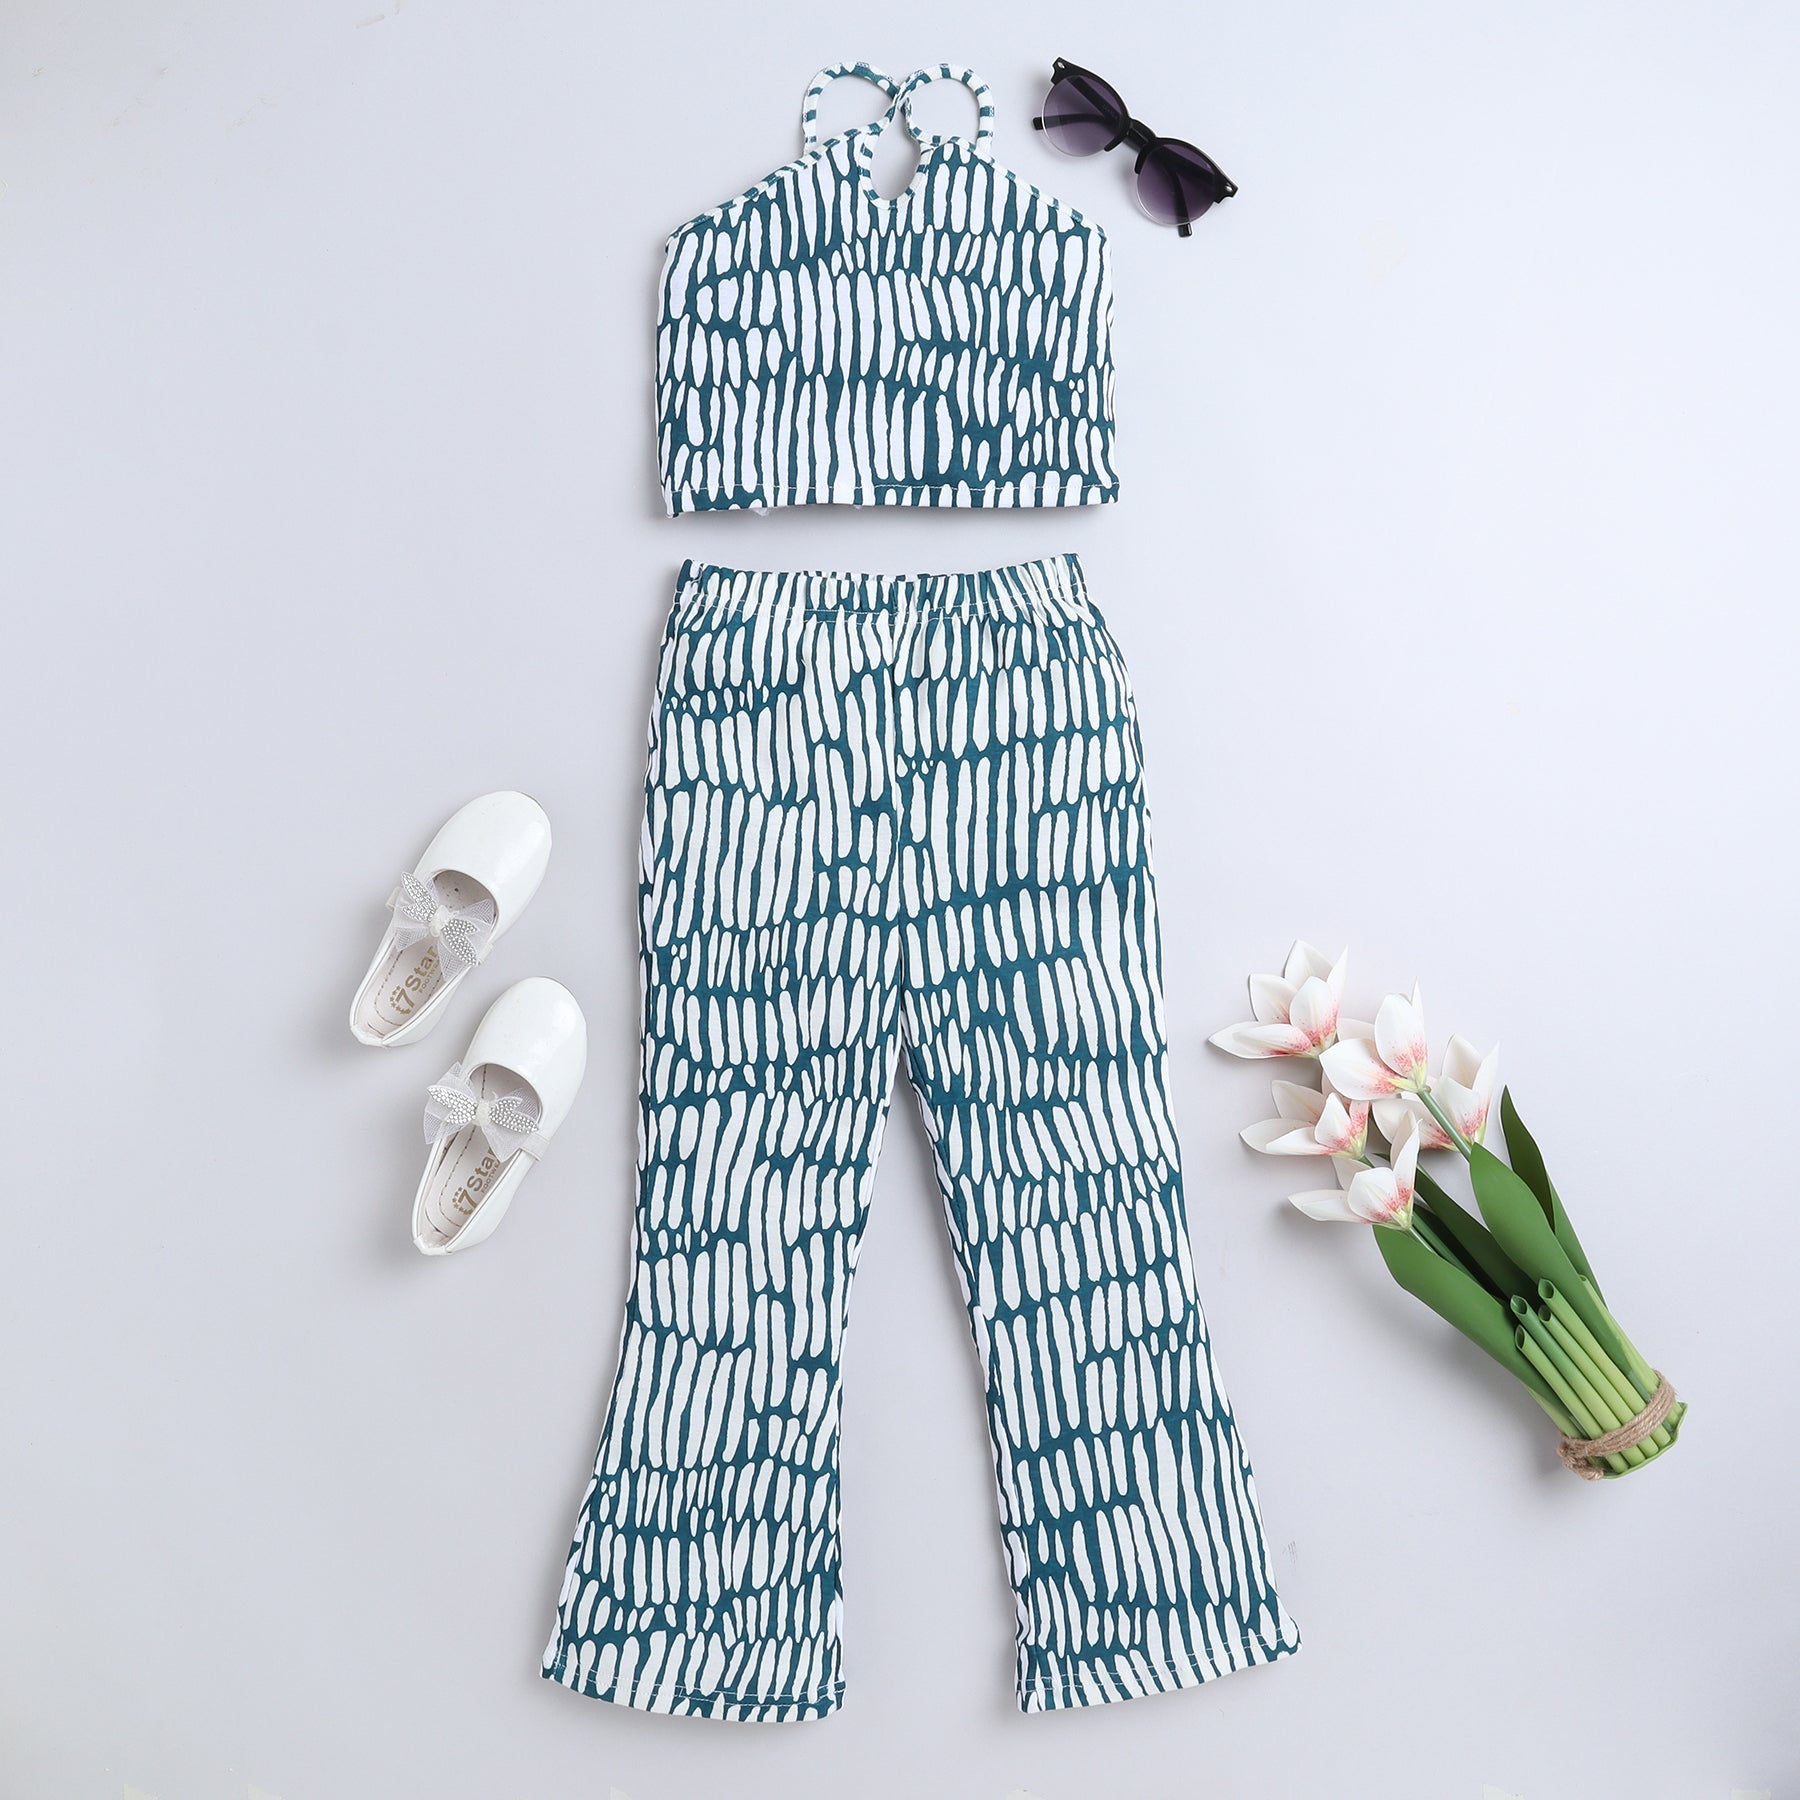 100% cotton abstract printed halter cut out neck crop top with matching bell bottom pant cord set - Green/white